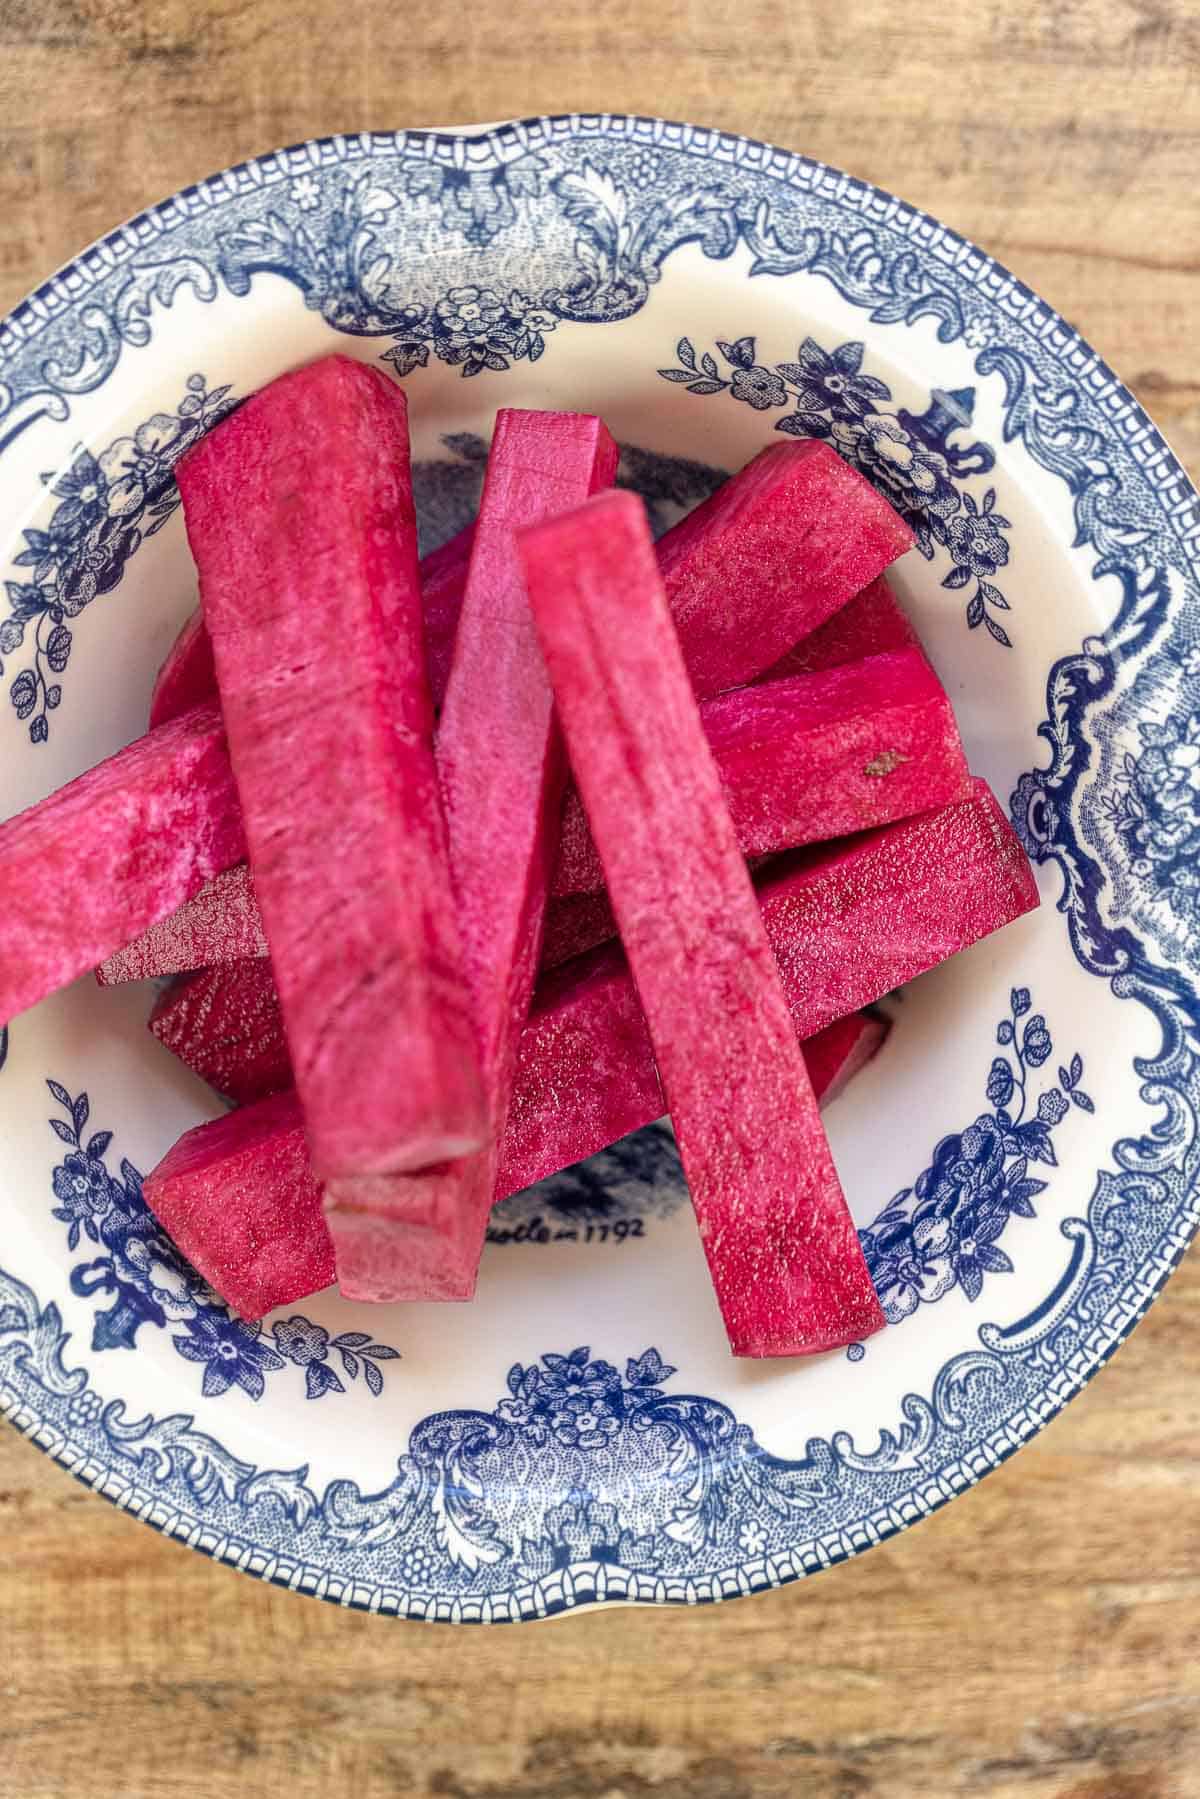 sliced turnip pink pickles in a small blue and white bowl